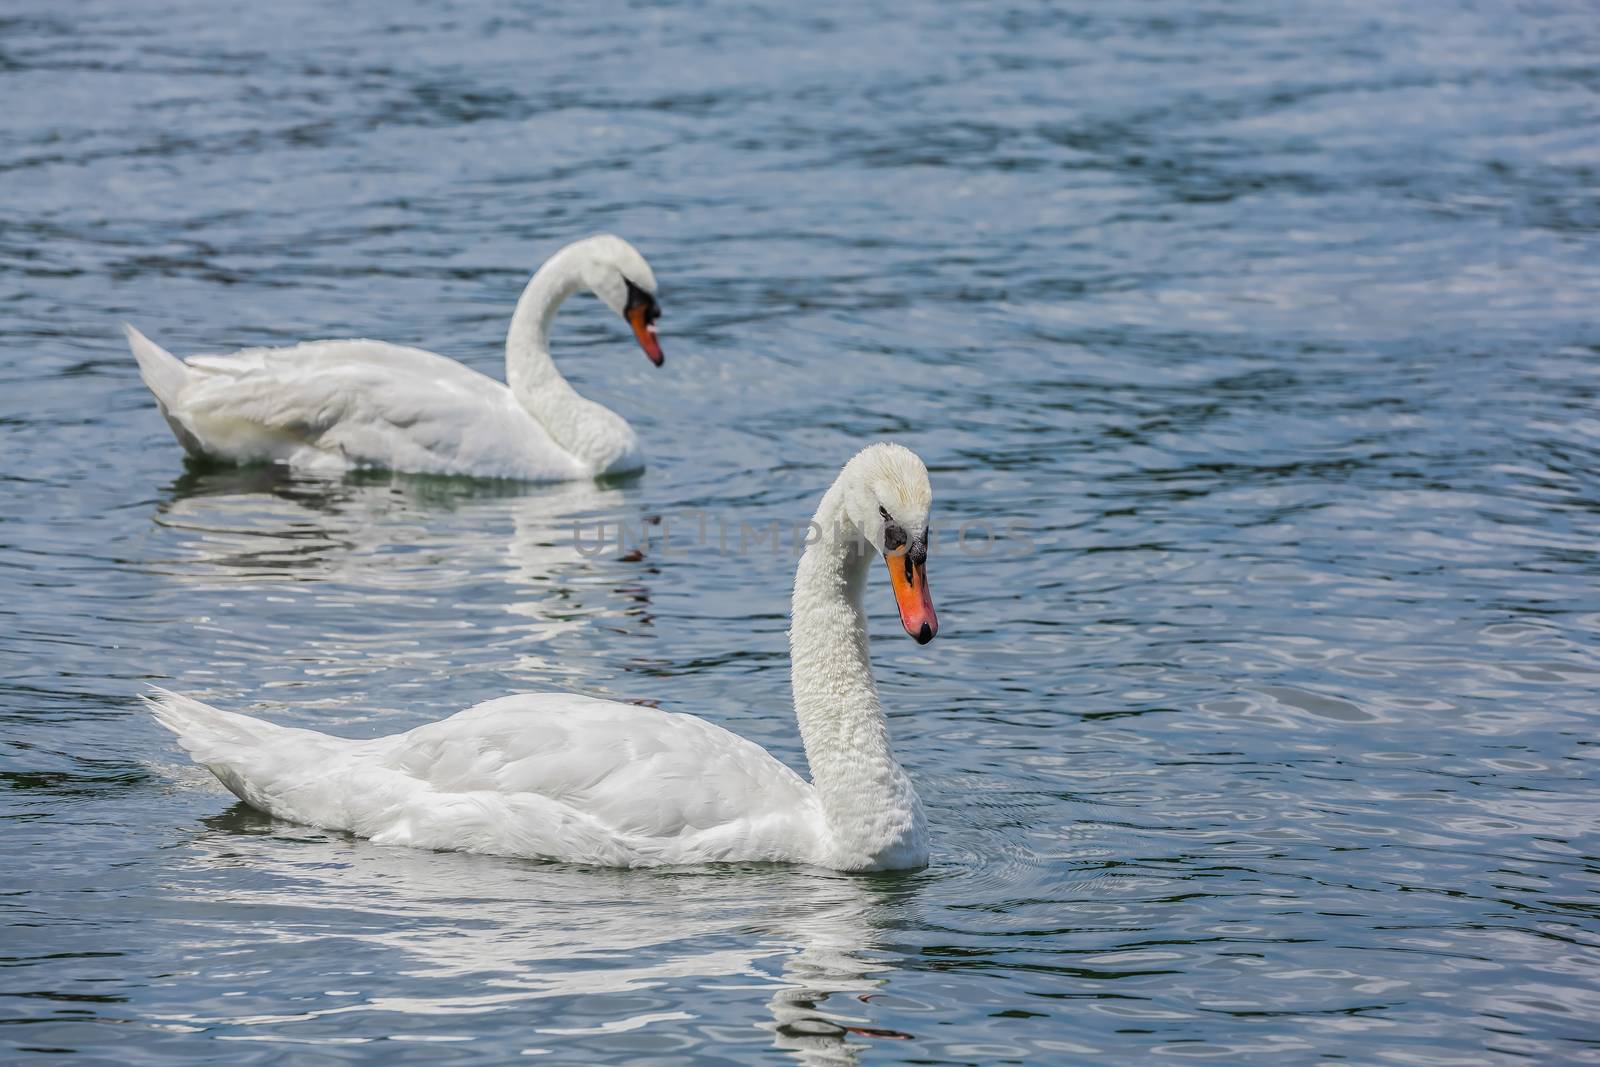 Gorgeous white swans in a lake by petkolophoto